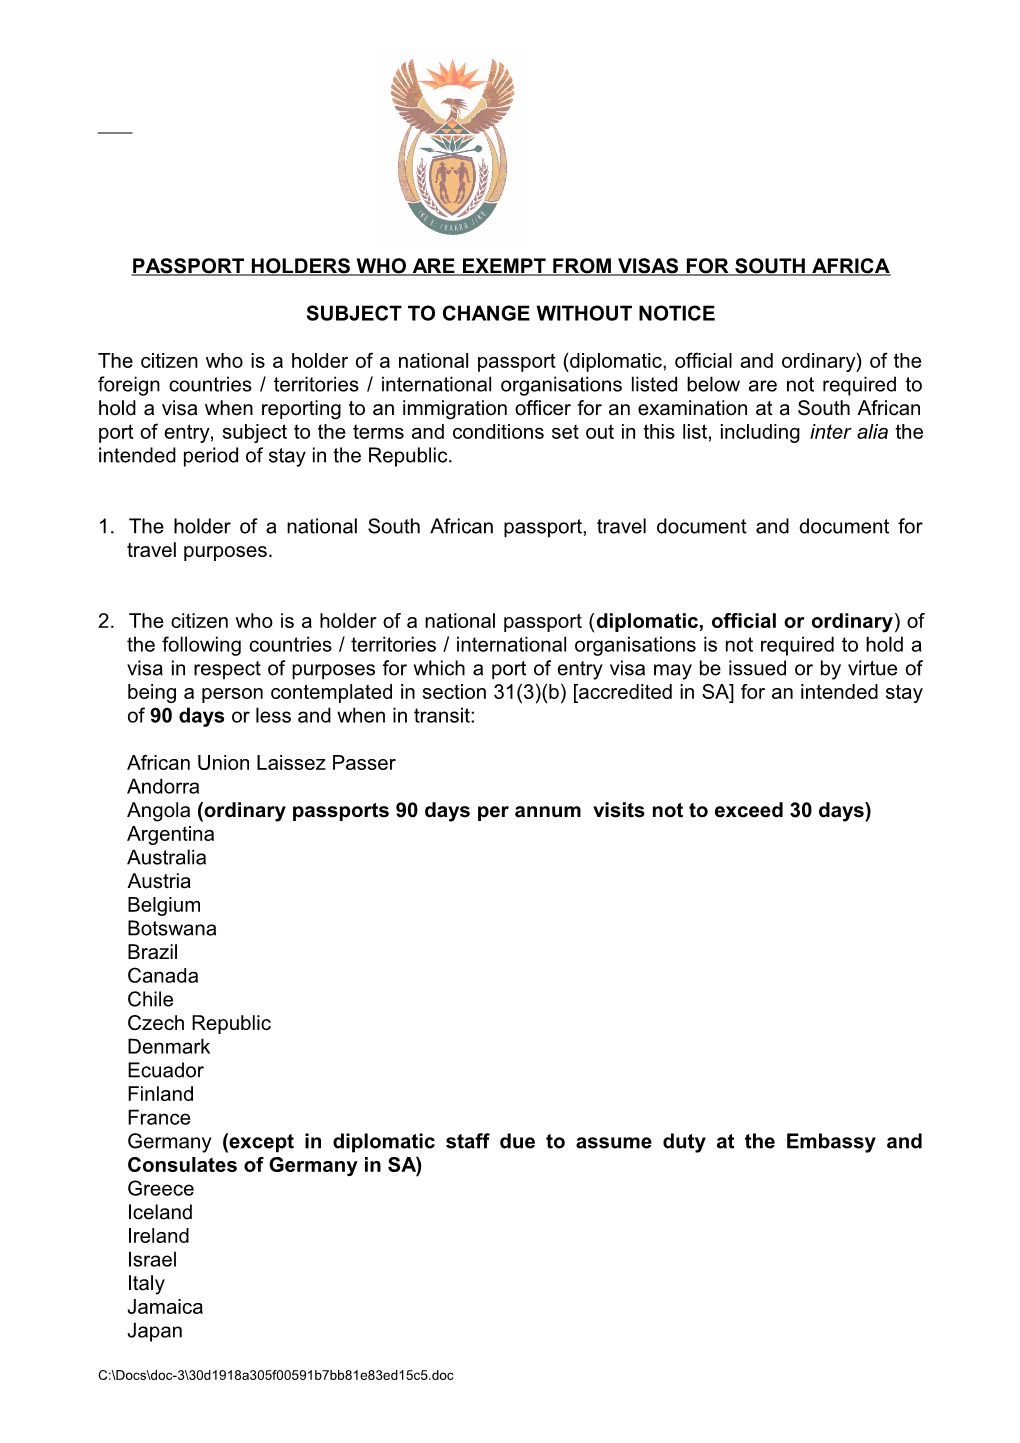 Passport Holders Who Are Exempt from Visas for South Africa